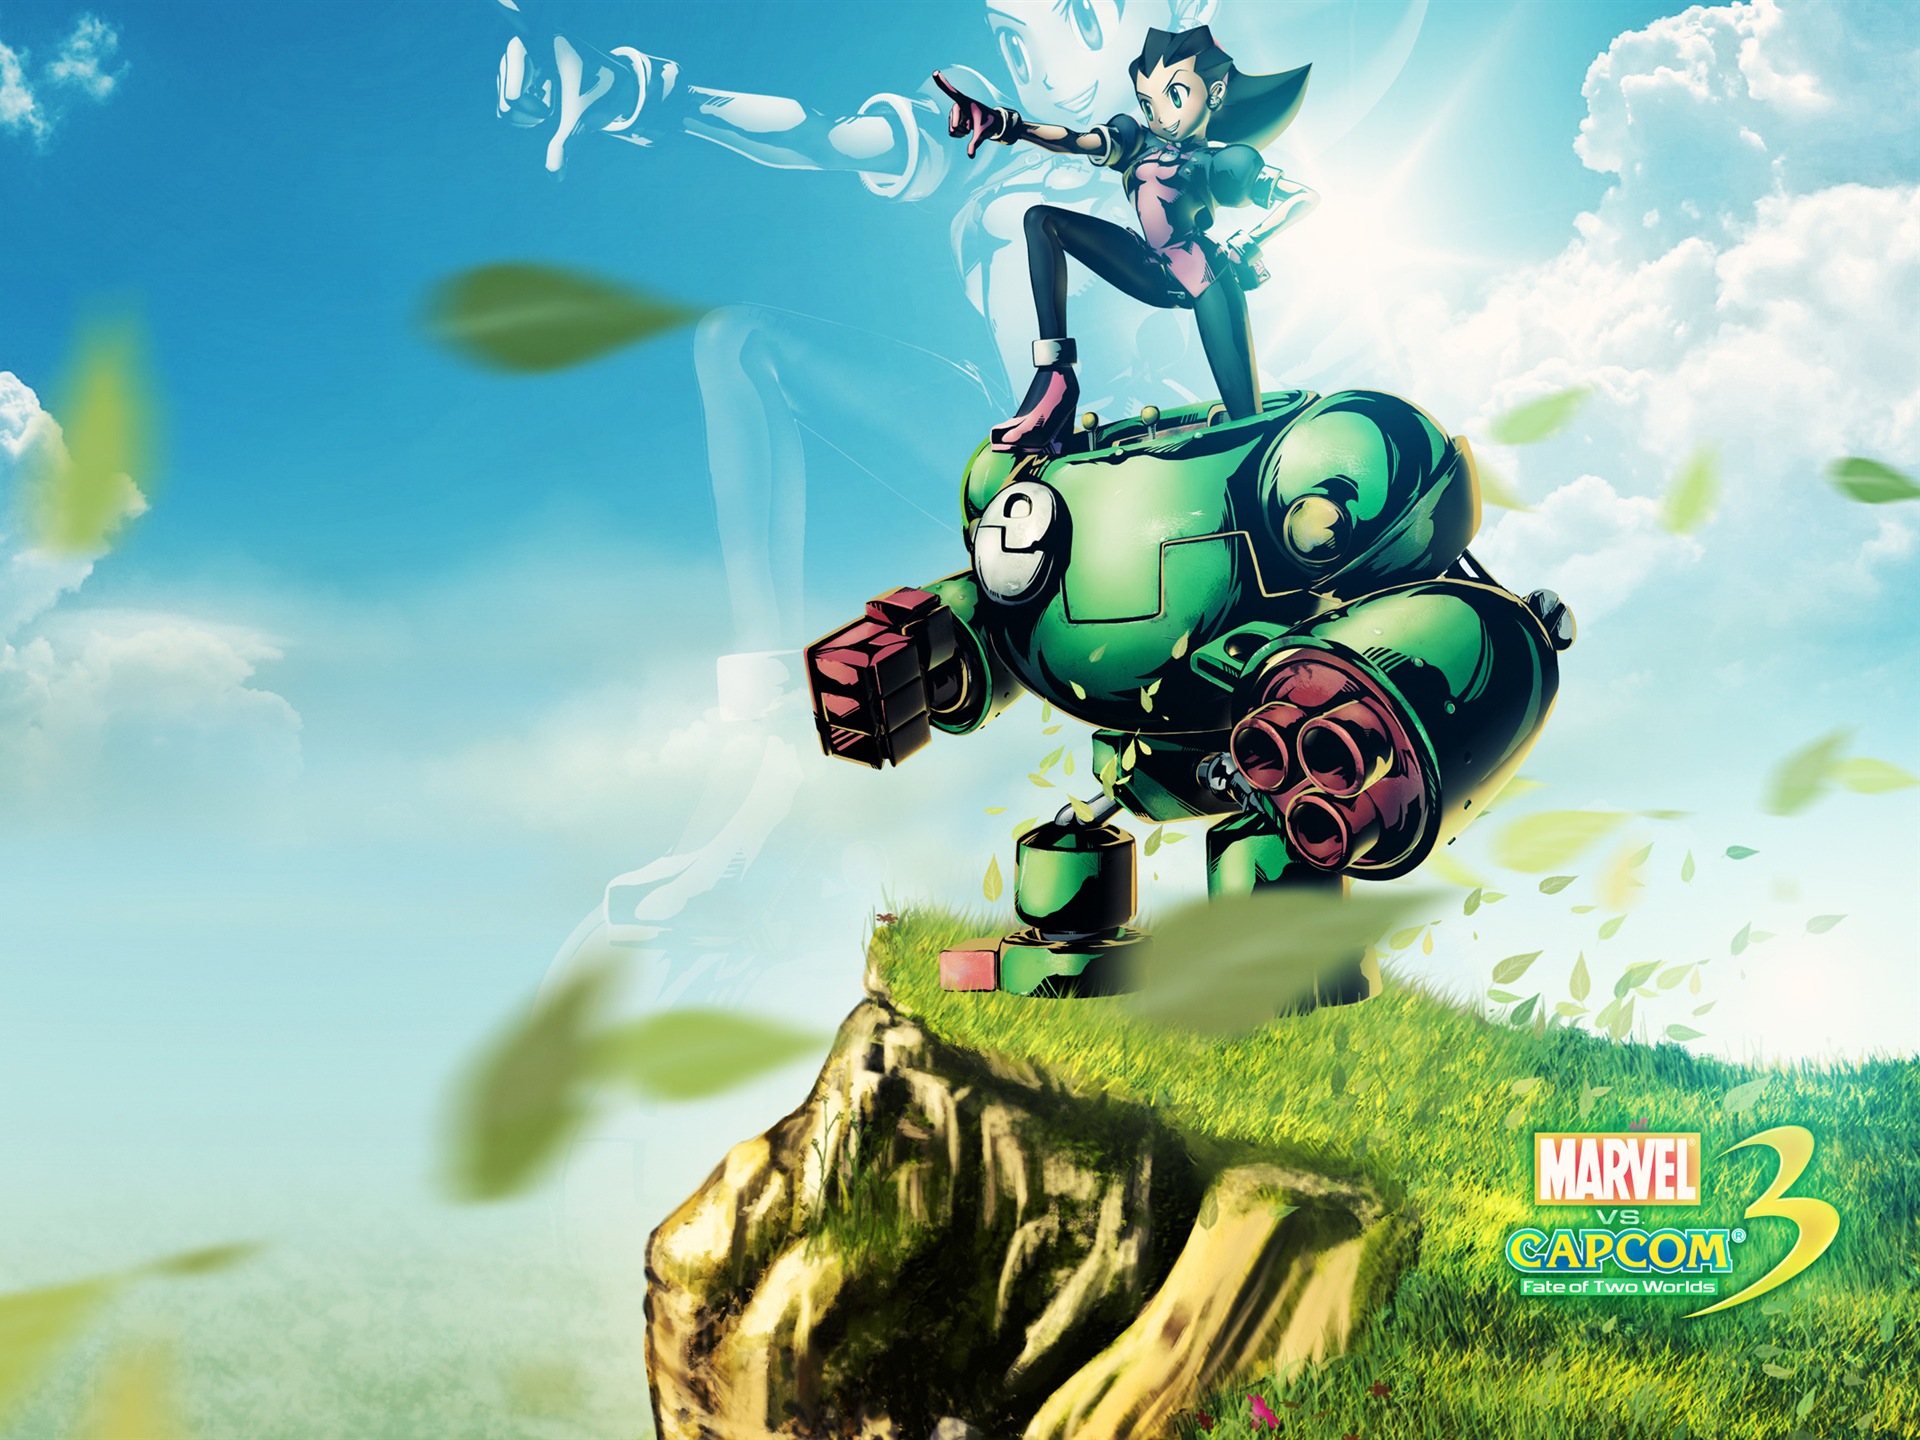 Marvel VS. Capcom 3: Fate of Two Worlds HD game wallpapers #26 - 1920x1440